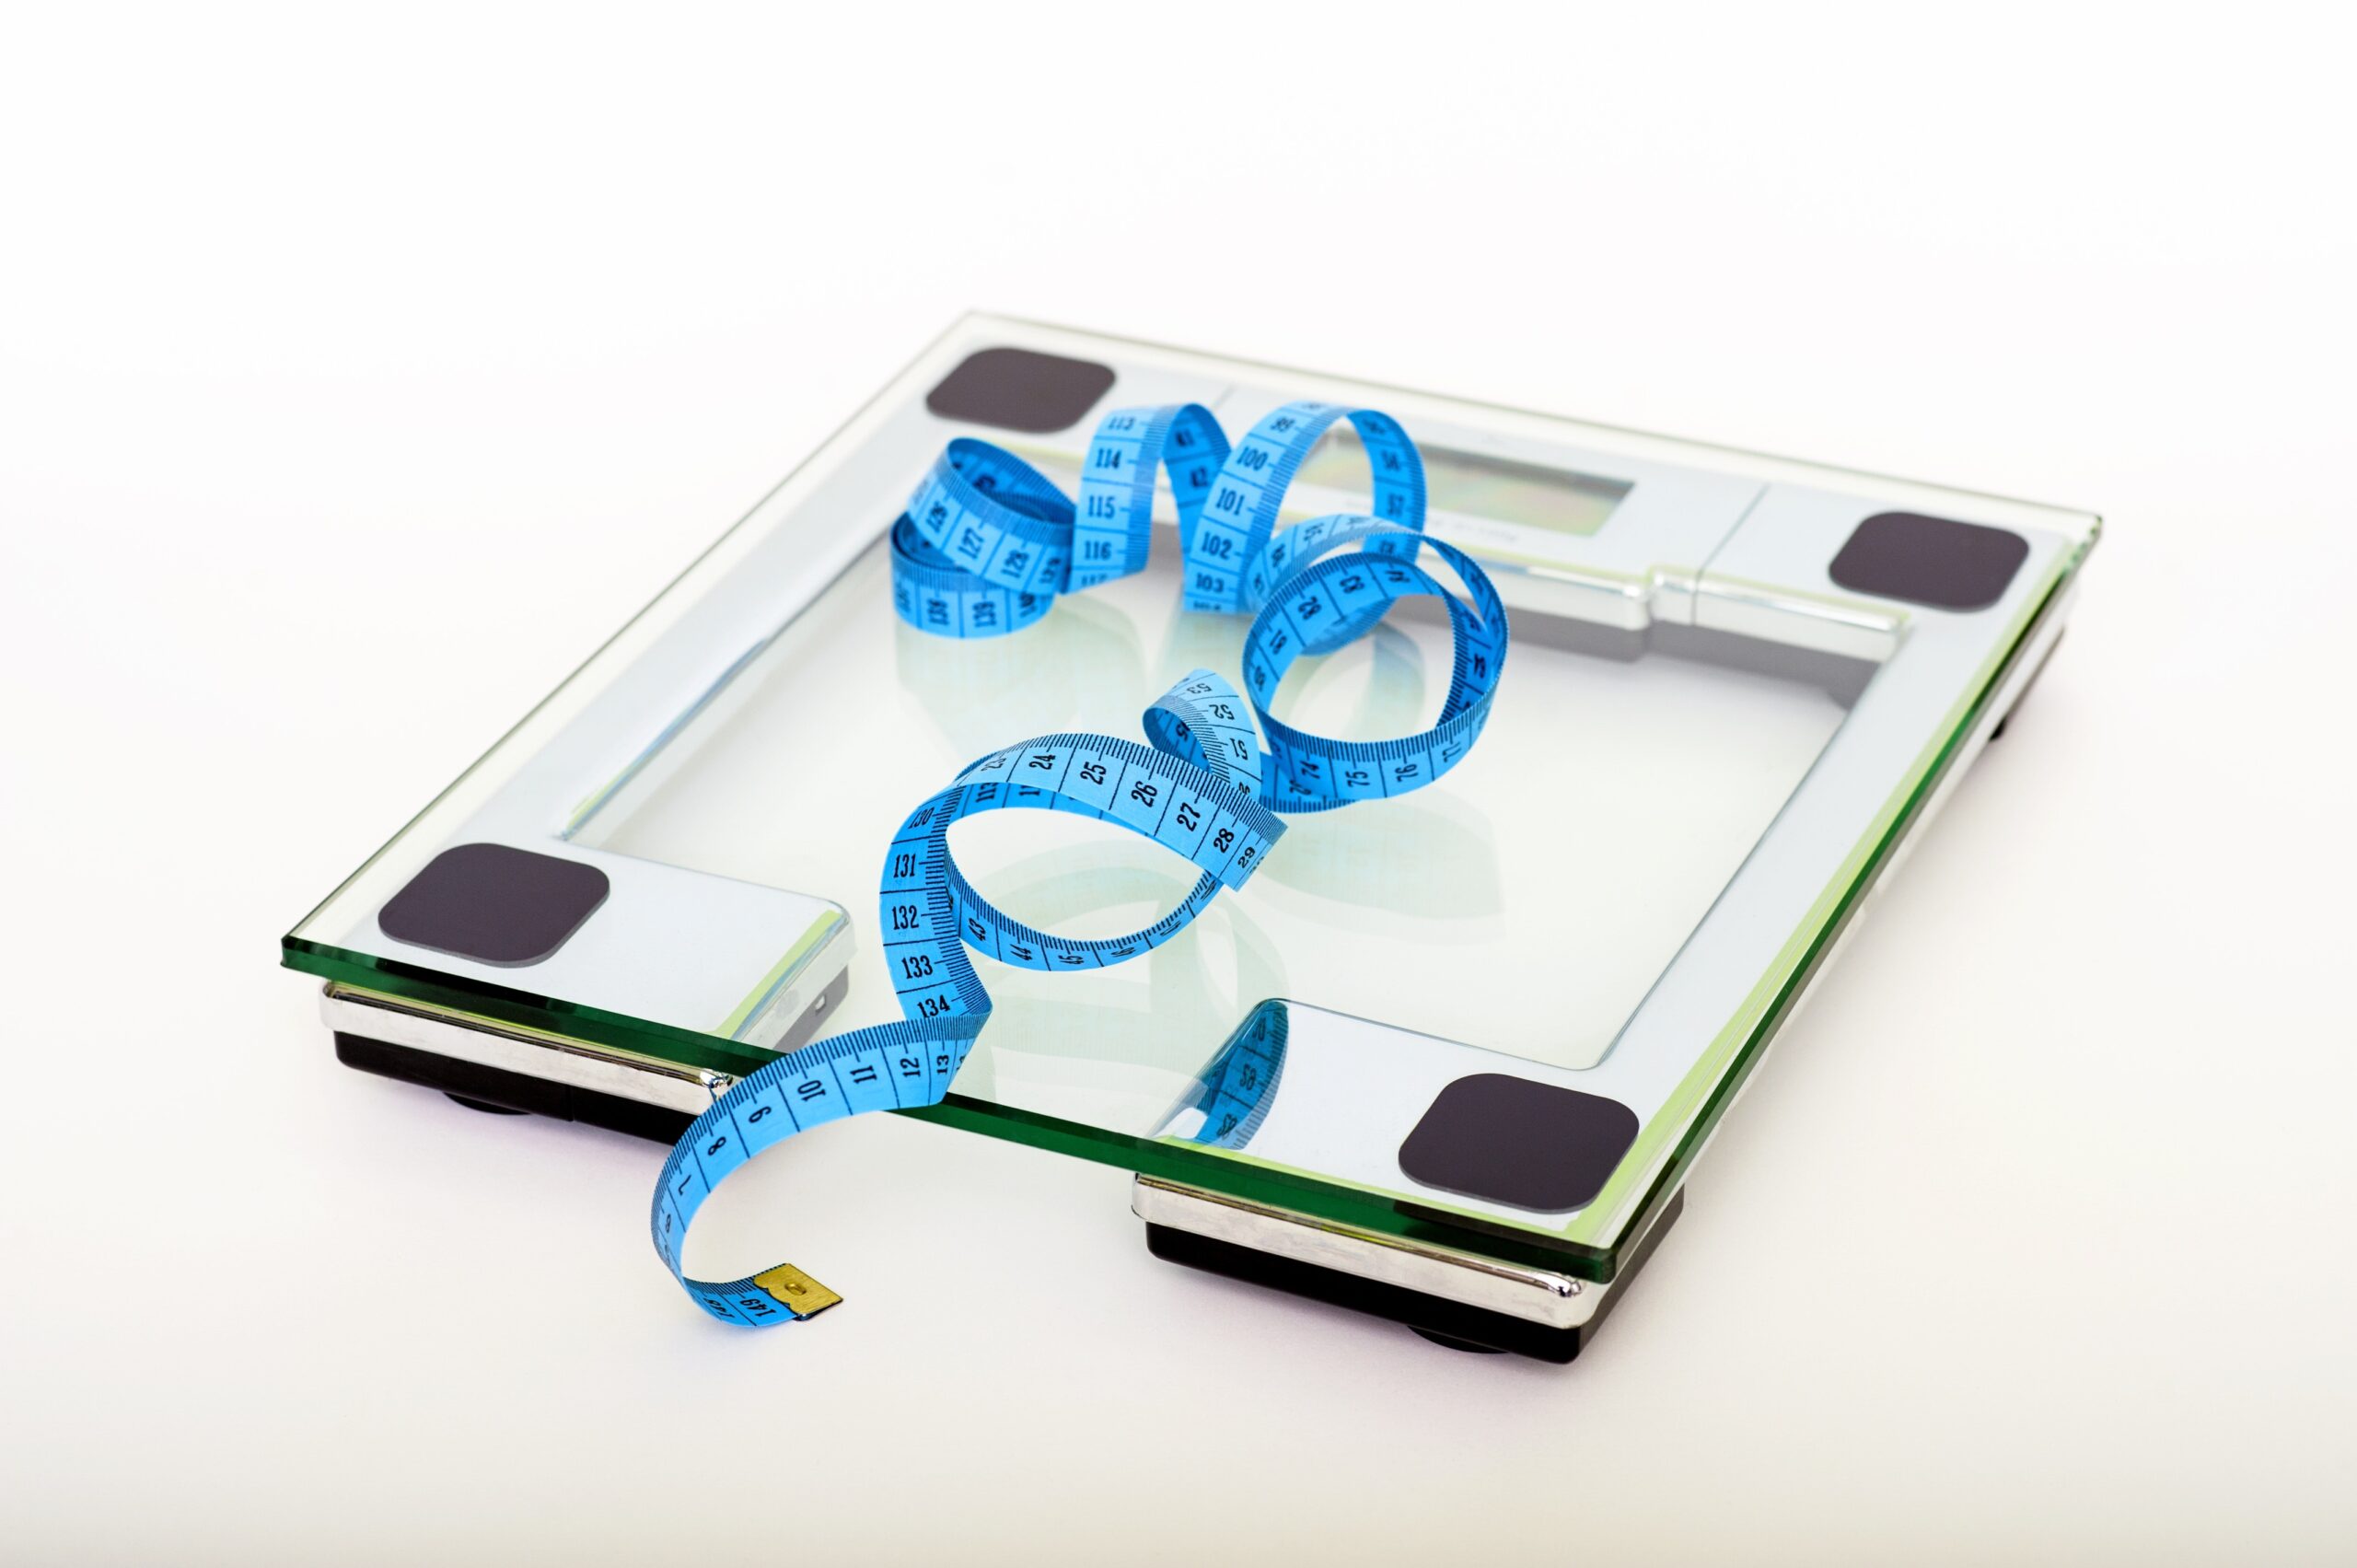 Doctors urge not to rely on BMI to assess health